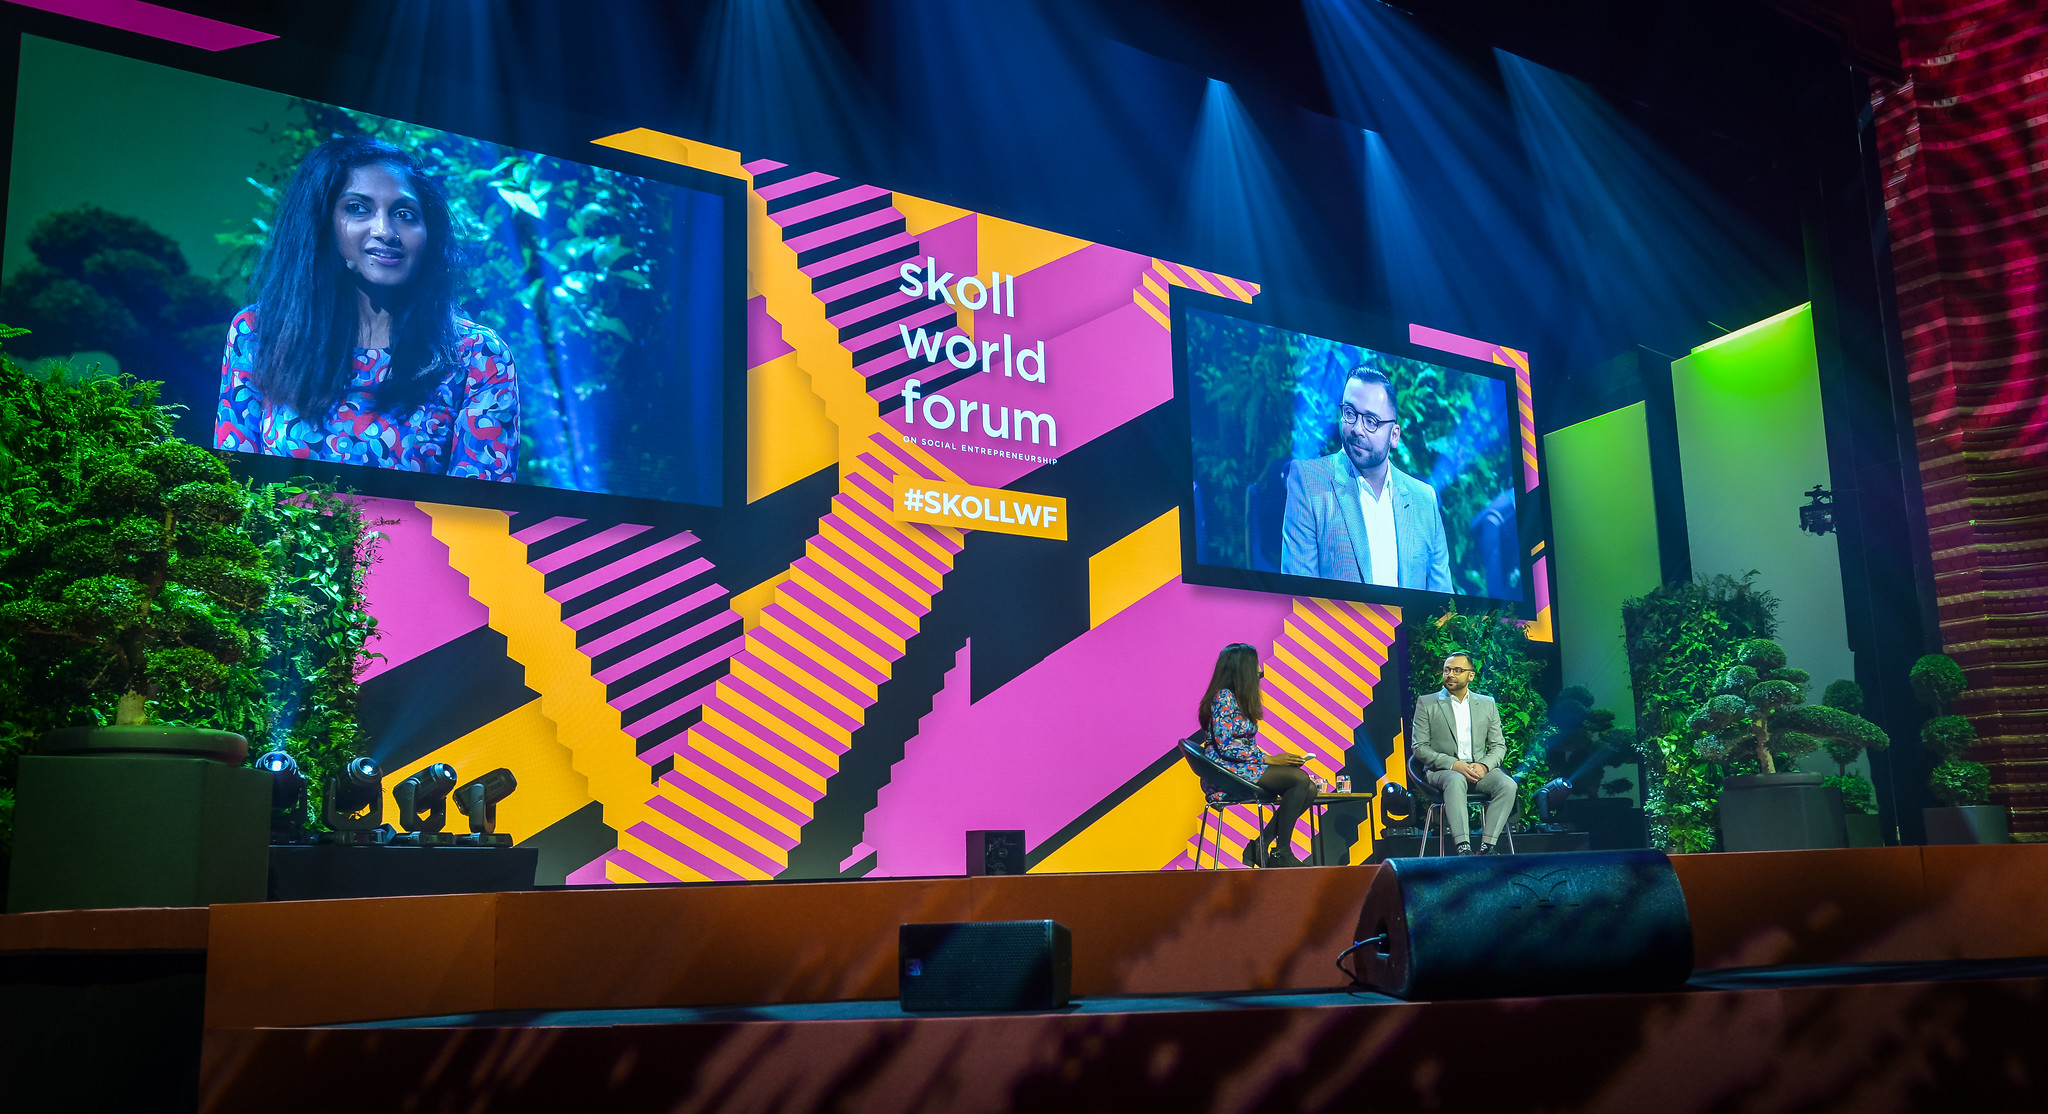 Skoll World Forum audience urged to face truths The